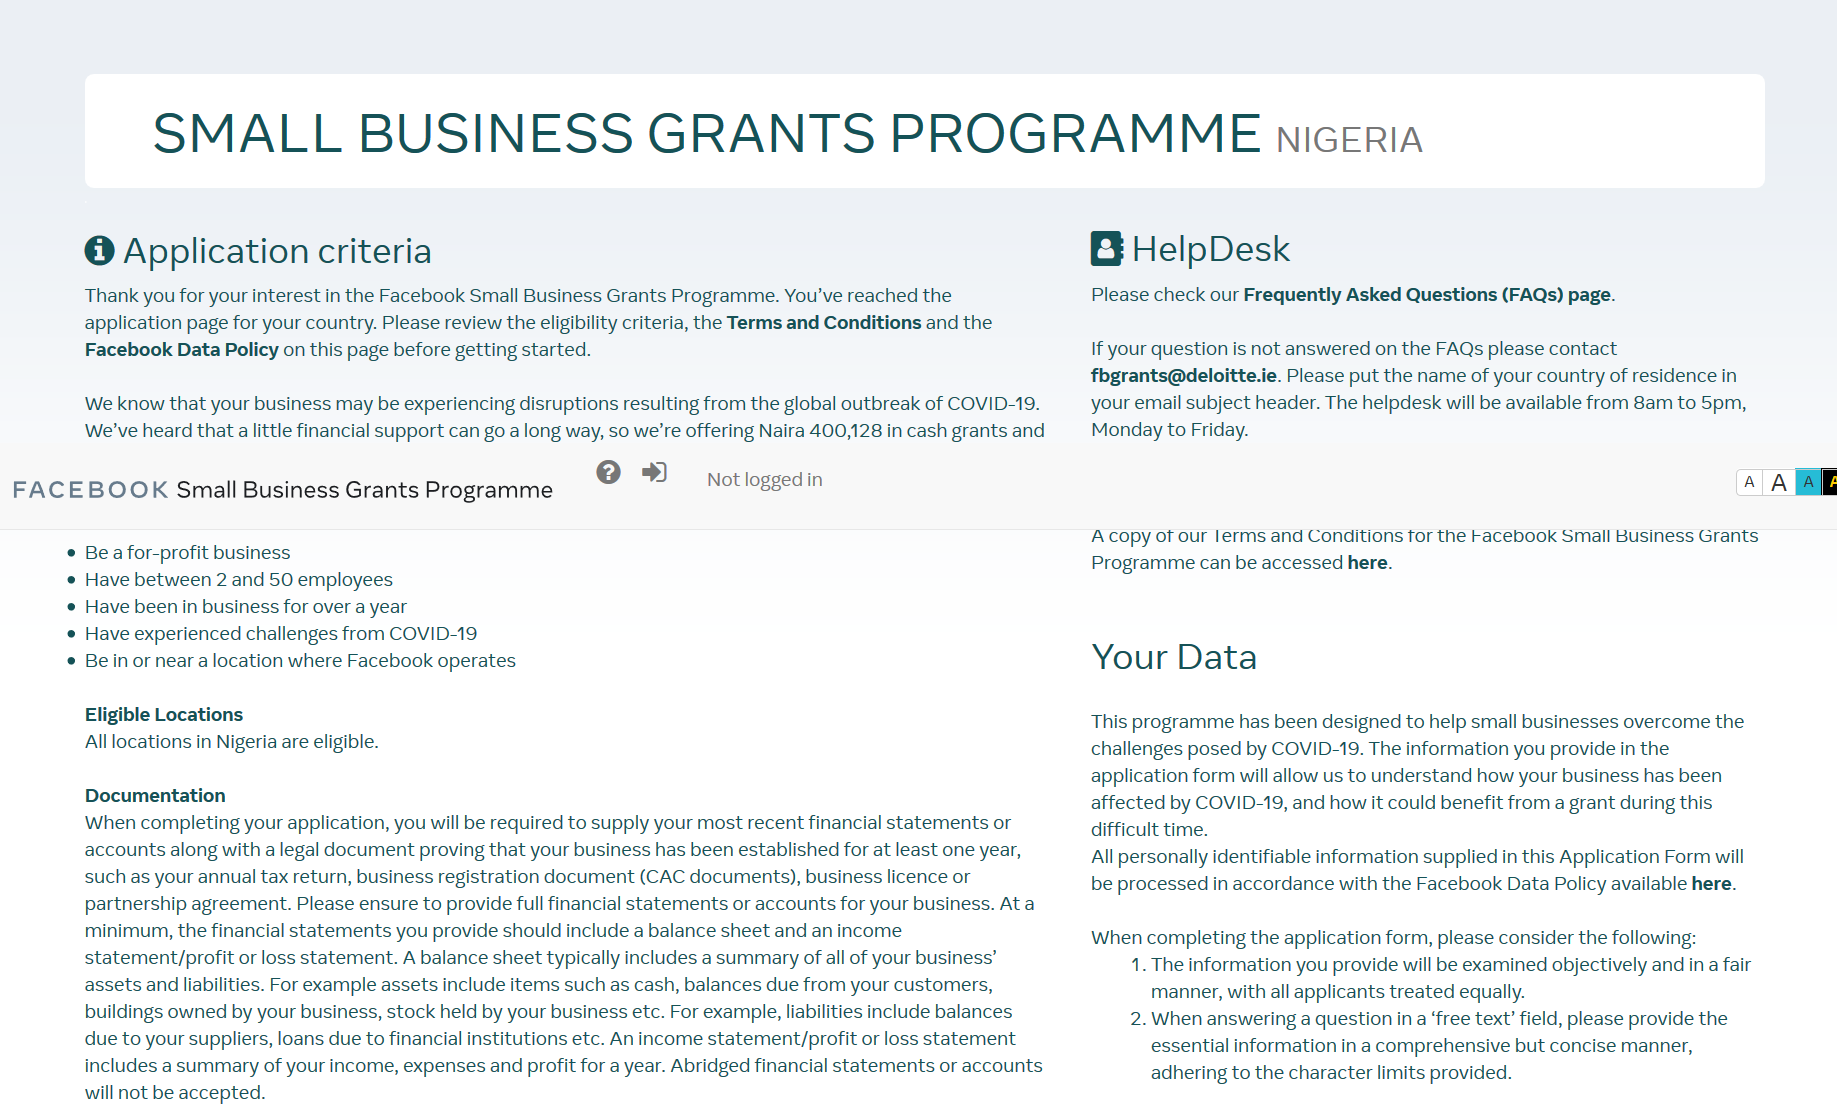 Apply for N400,128 Cash and 240,077 Ad Coupon Facebook Small Business Grants Programme in Nigeria closes on 4 Sept 2020